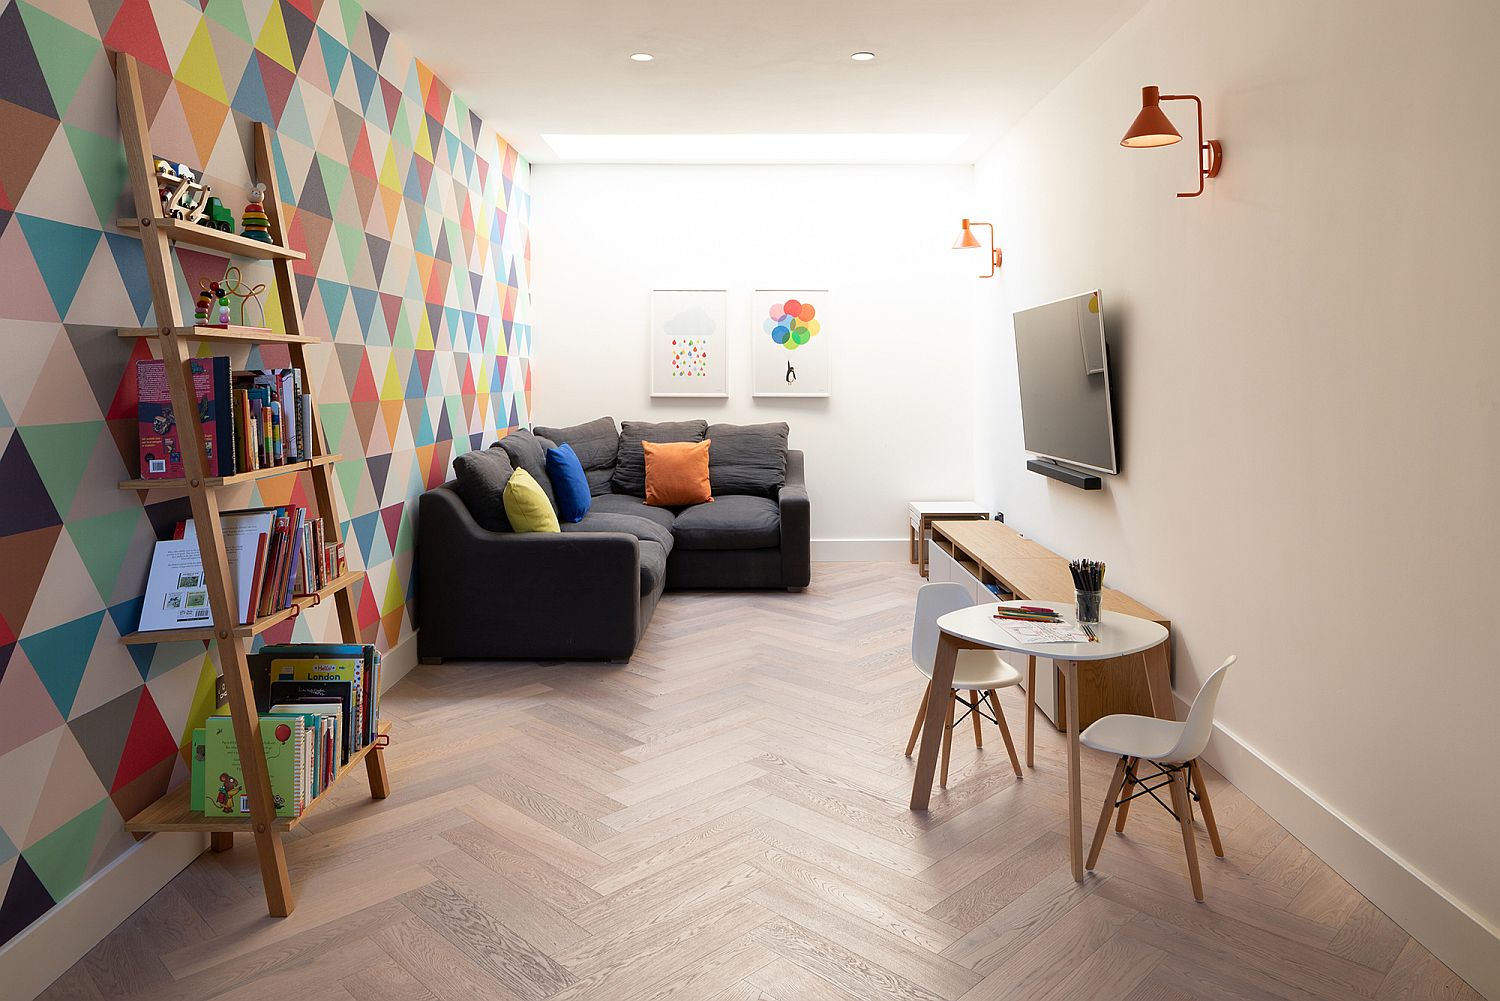 Multi-colored-and-geometric-accent-wall-for-the-family-room